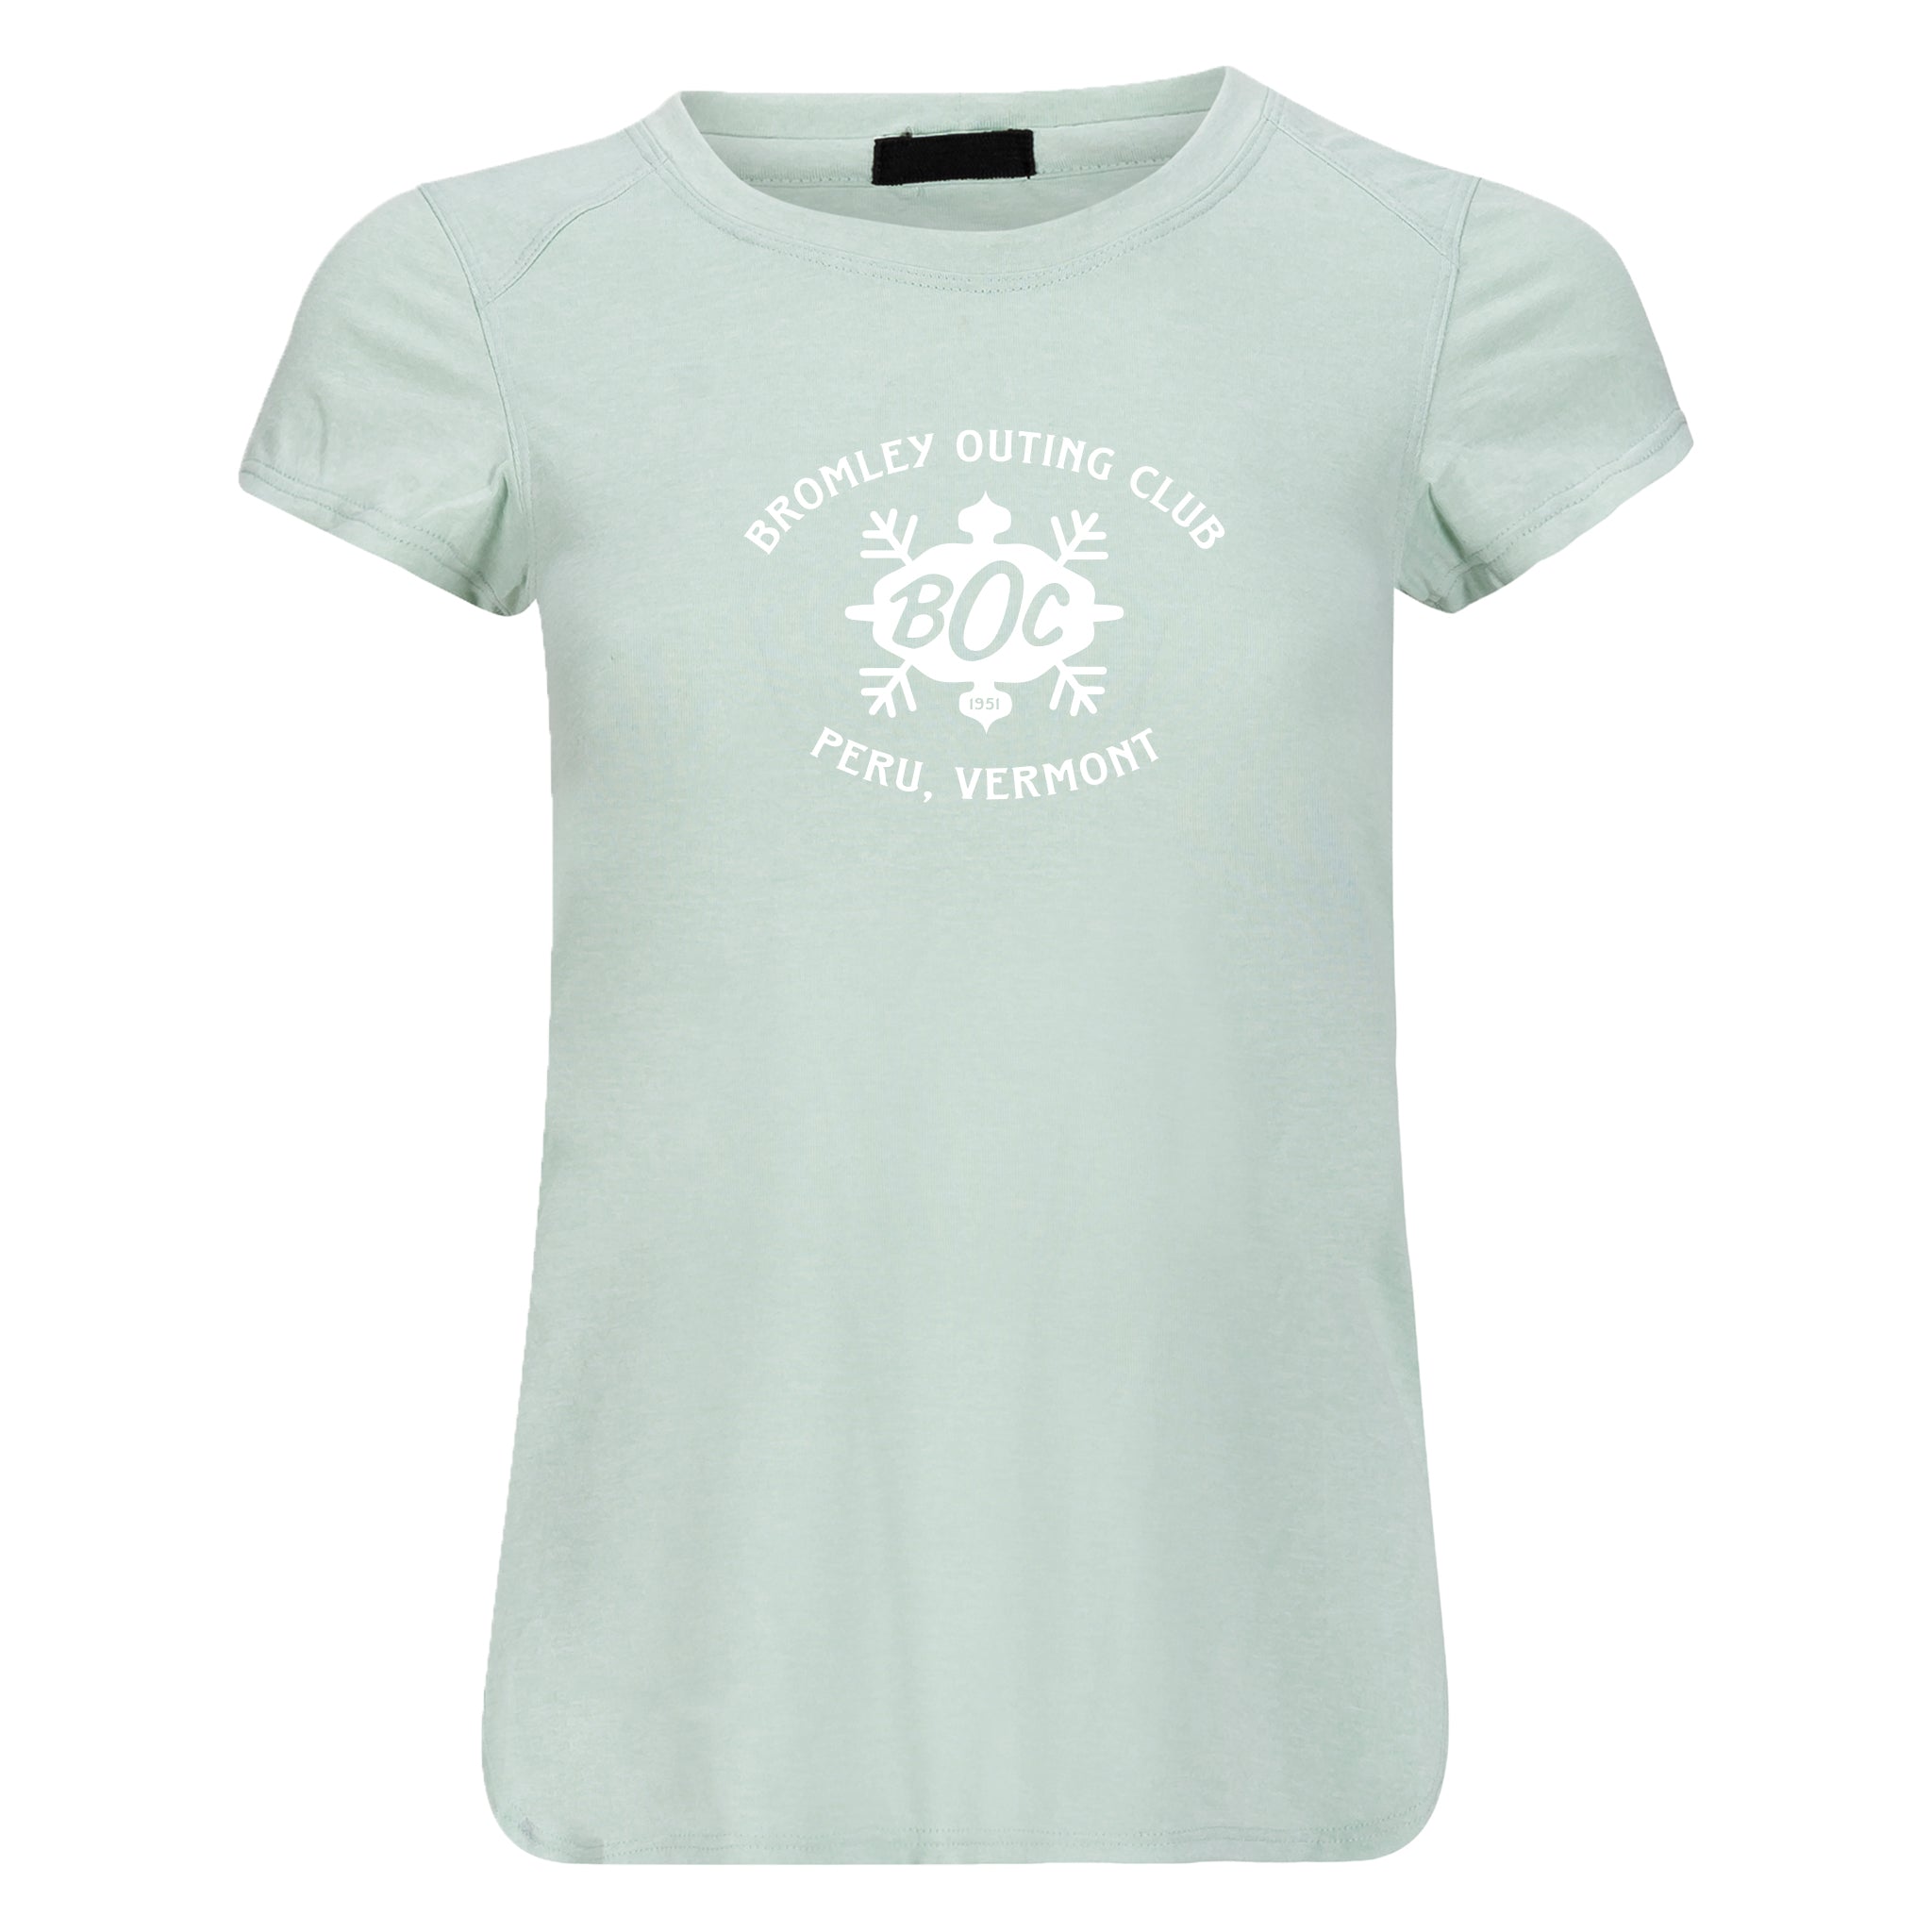 Women's Deluge Short Sleeve - Bromley Outing Club